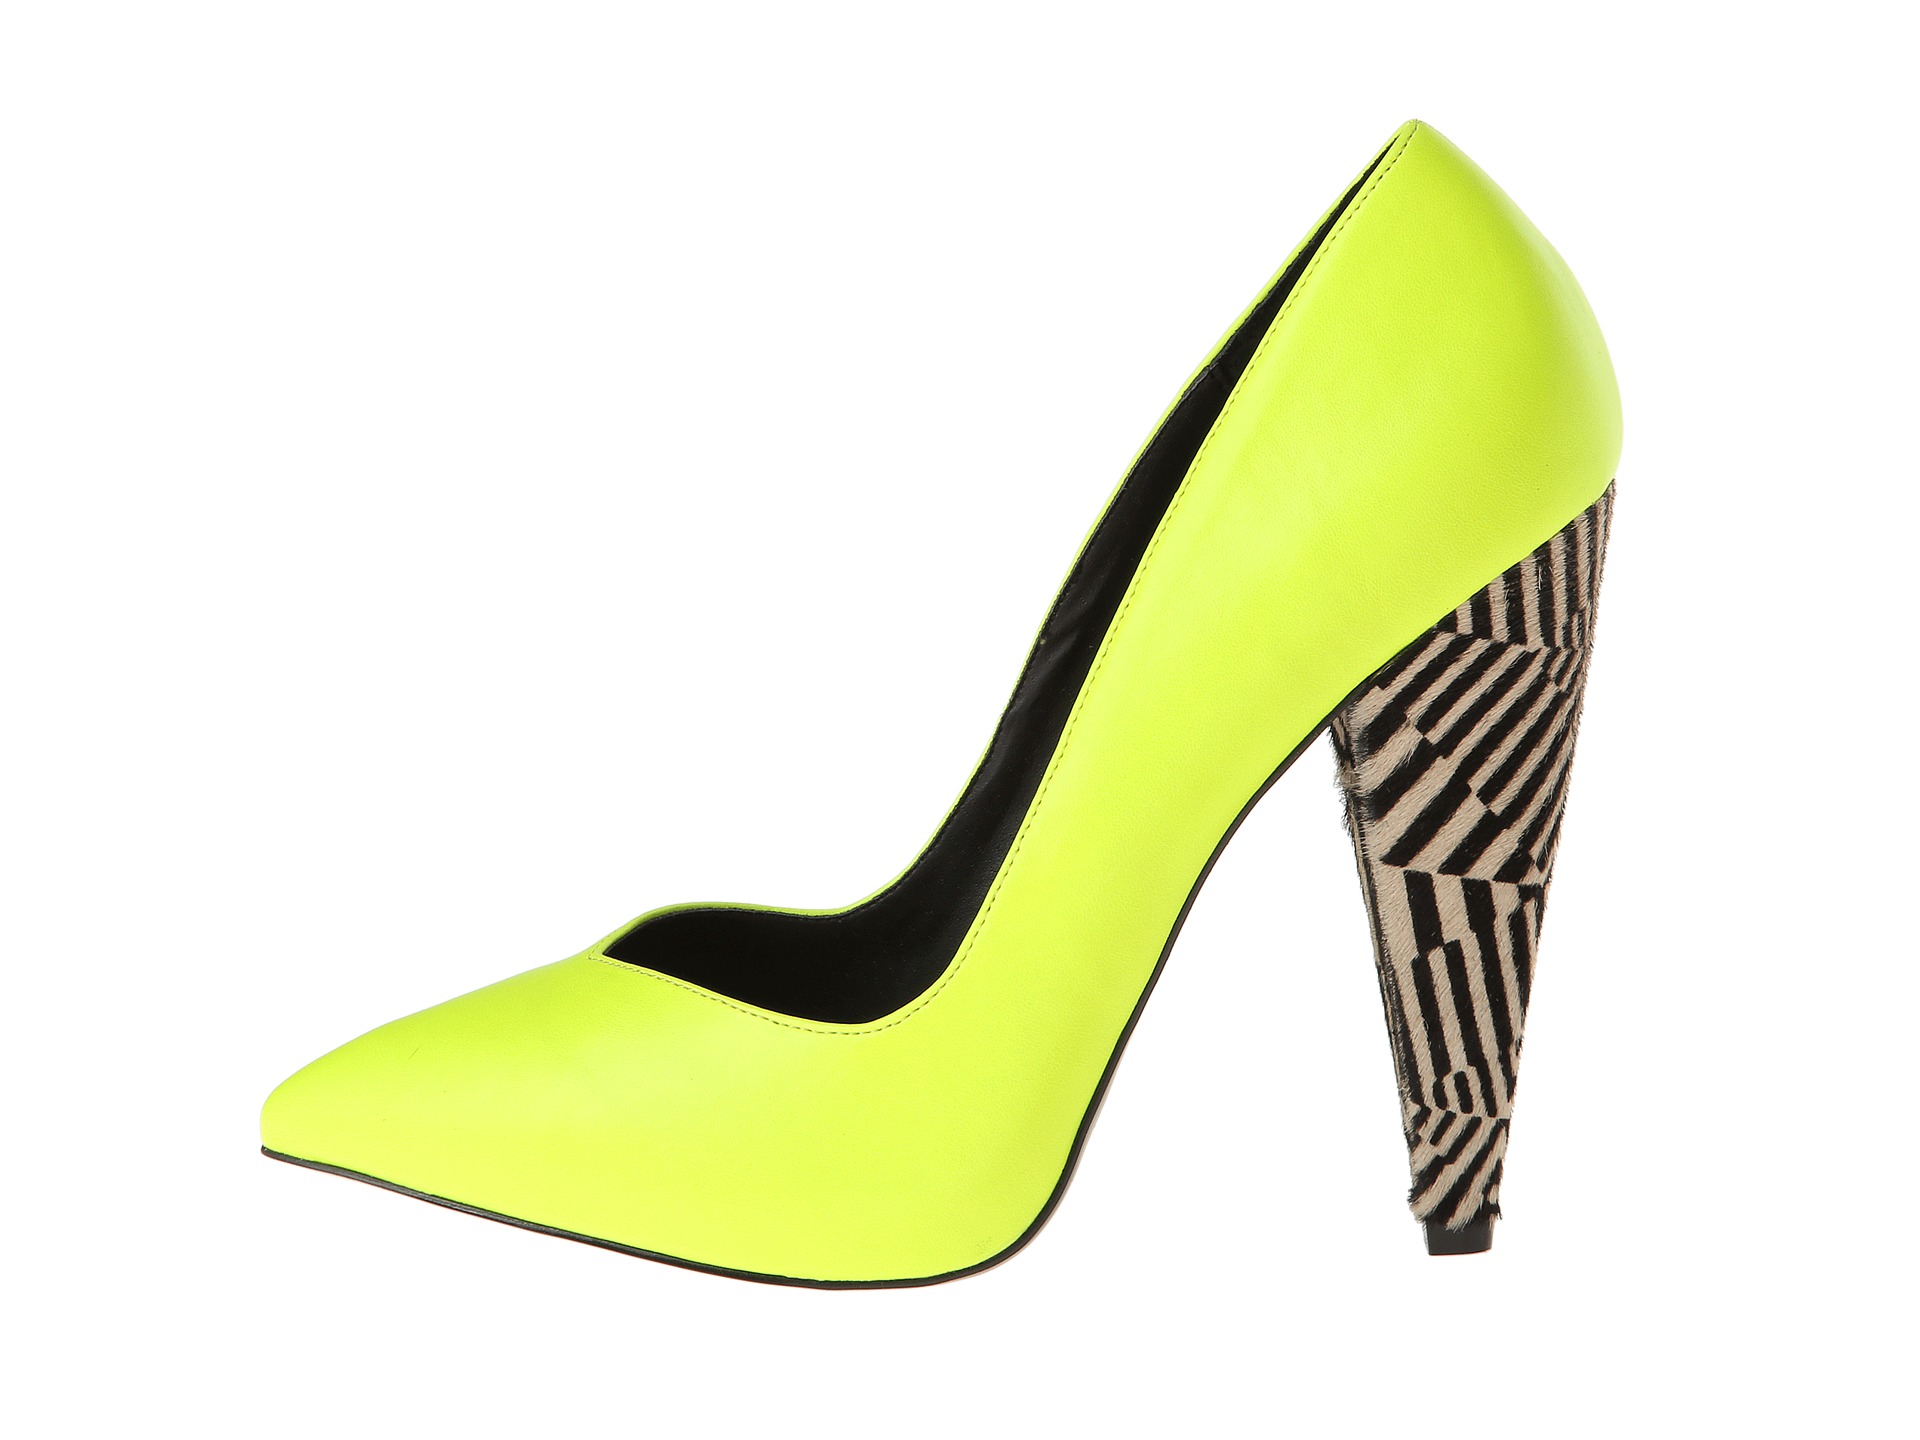 Steve Madden Keyshia Cole Excit Yellow Multi | Shipped Free at Zappos